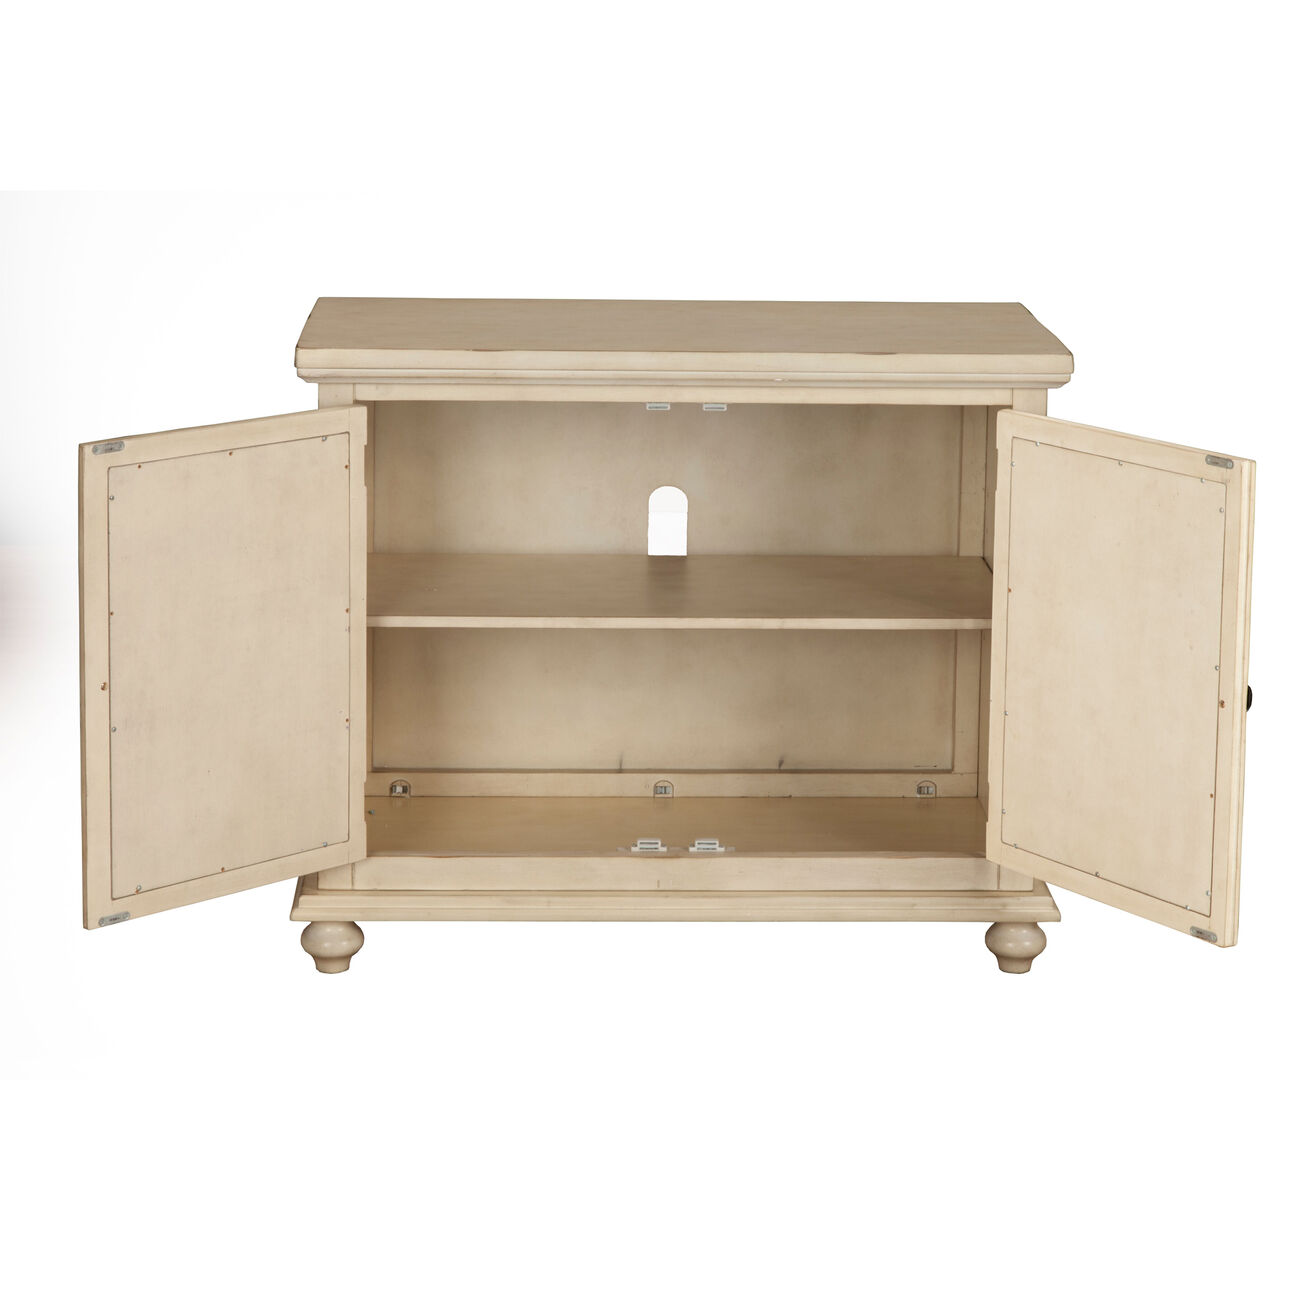 Transitional Wood and Glass TV Stand with Trellis Cabinet Front, Beige